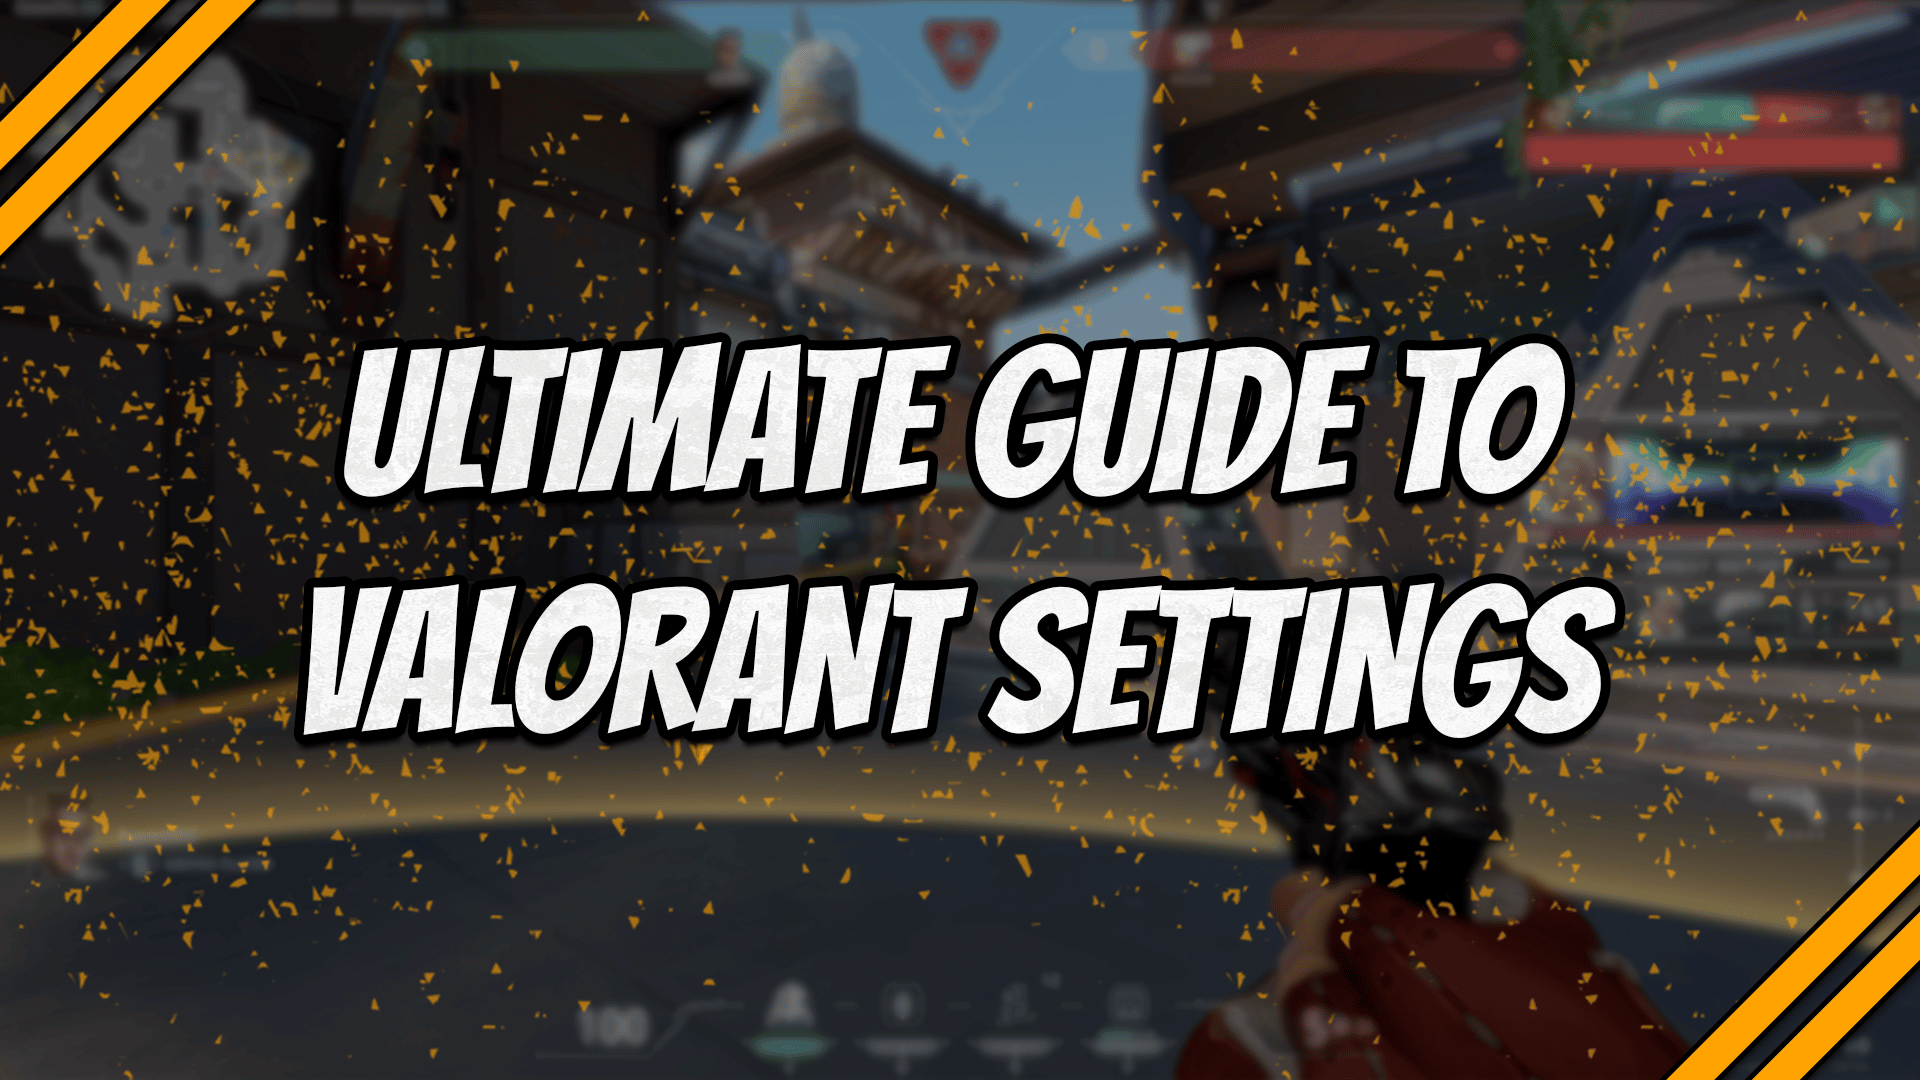 Ultimate Guide to Valorant Settings